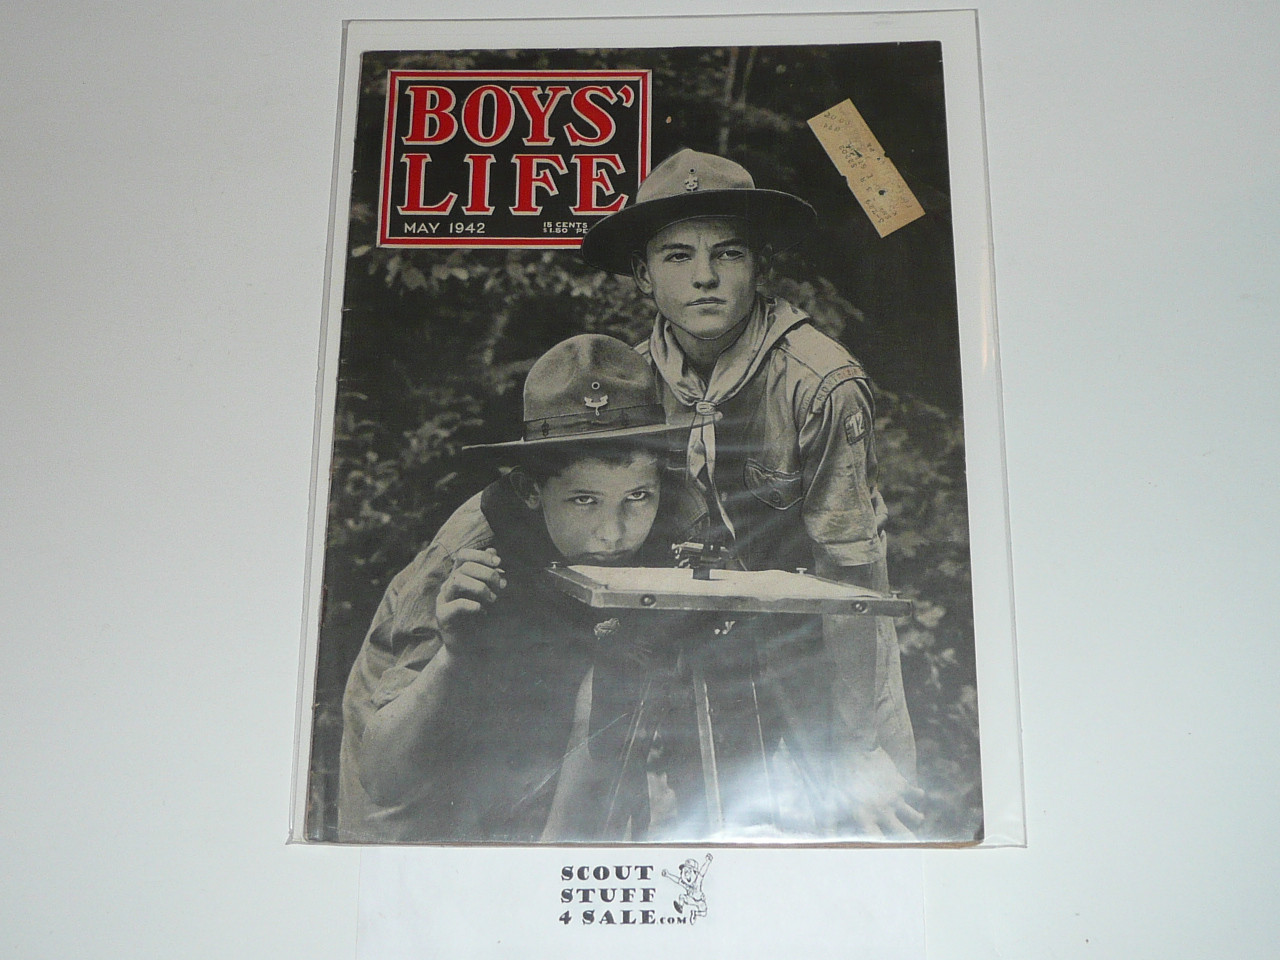 1942, May Boys' Life Magazine, Boy Scouts of America